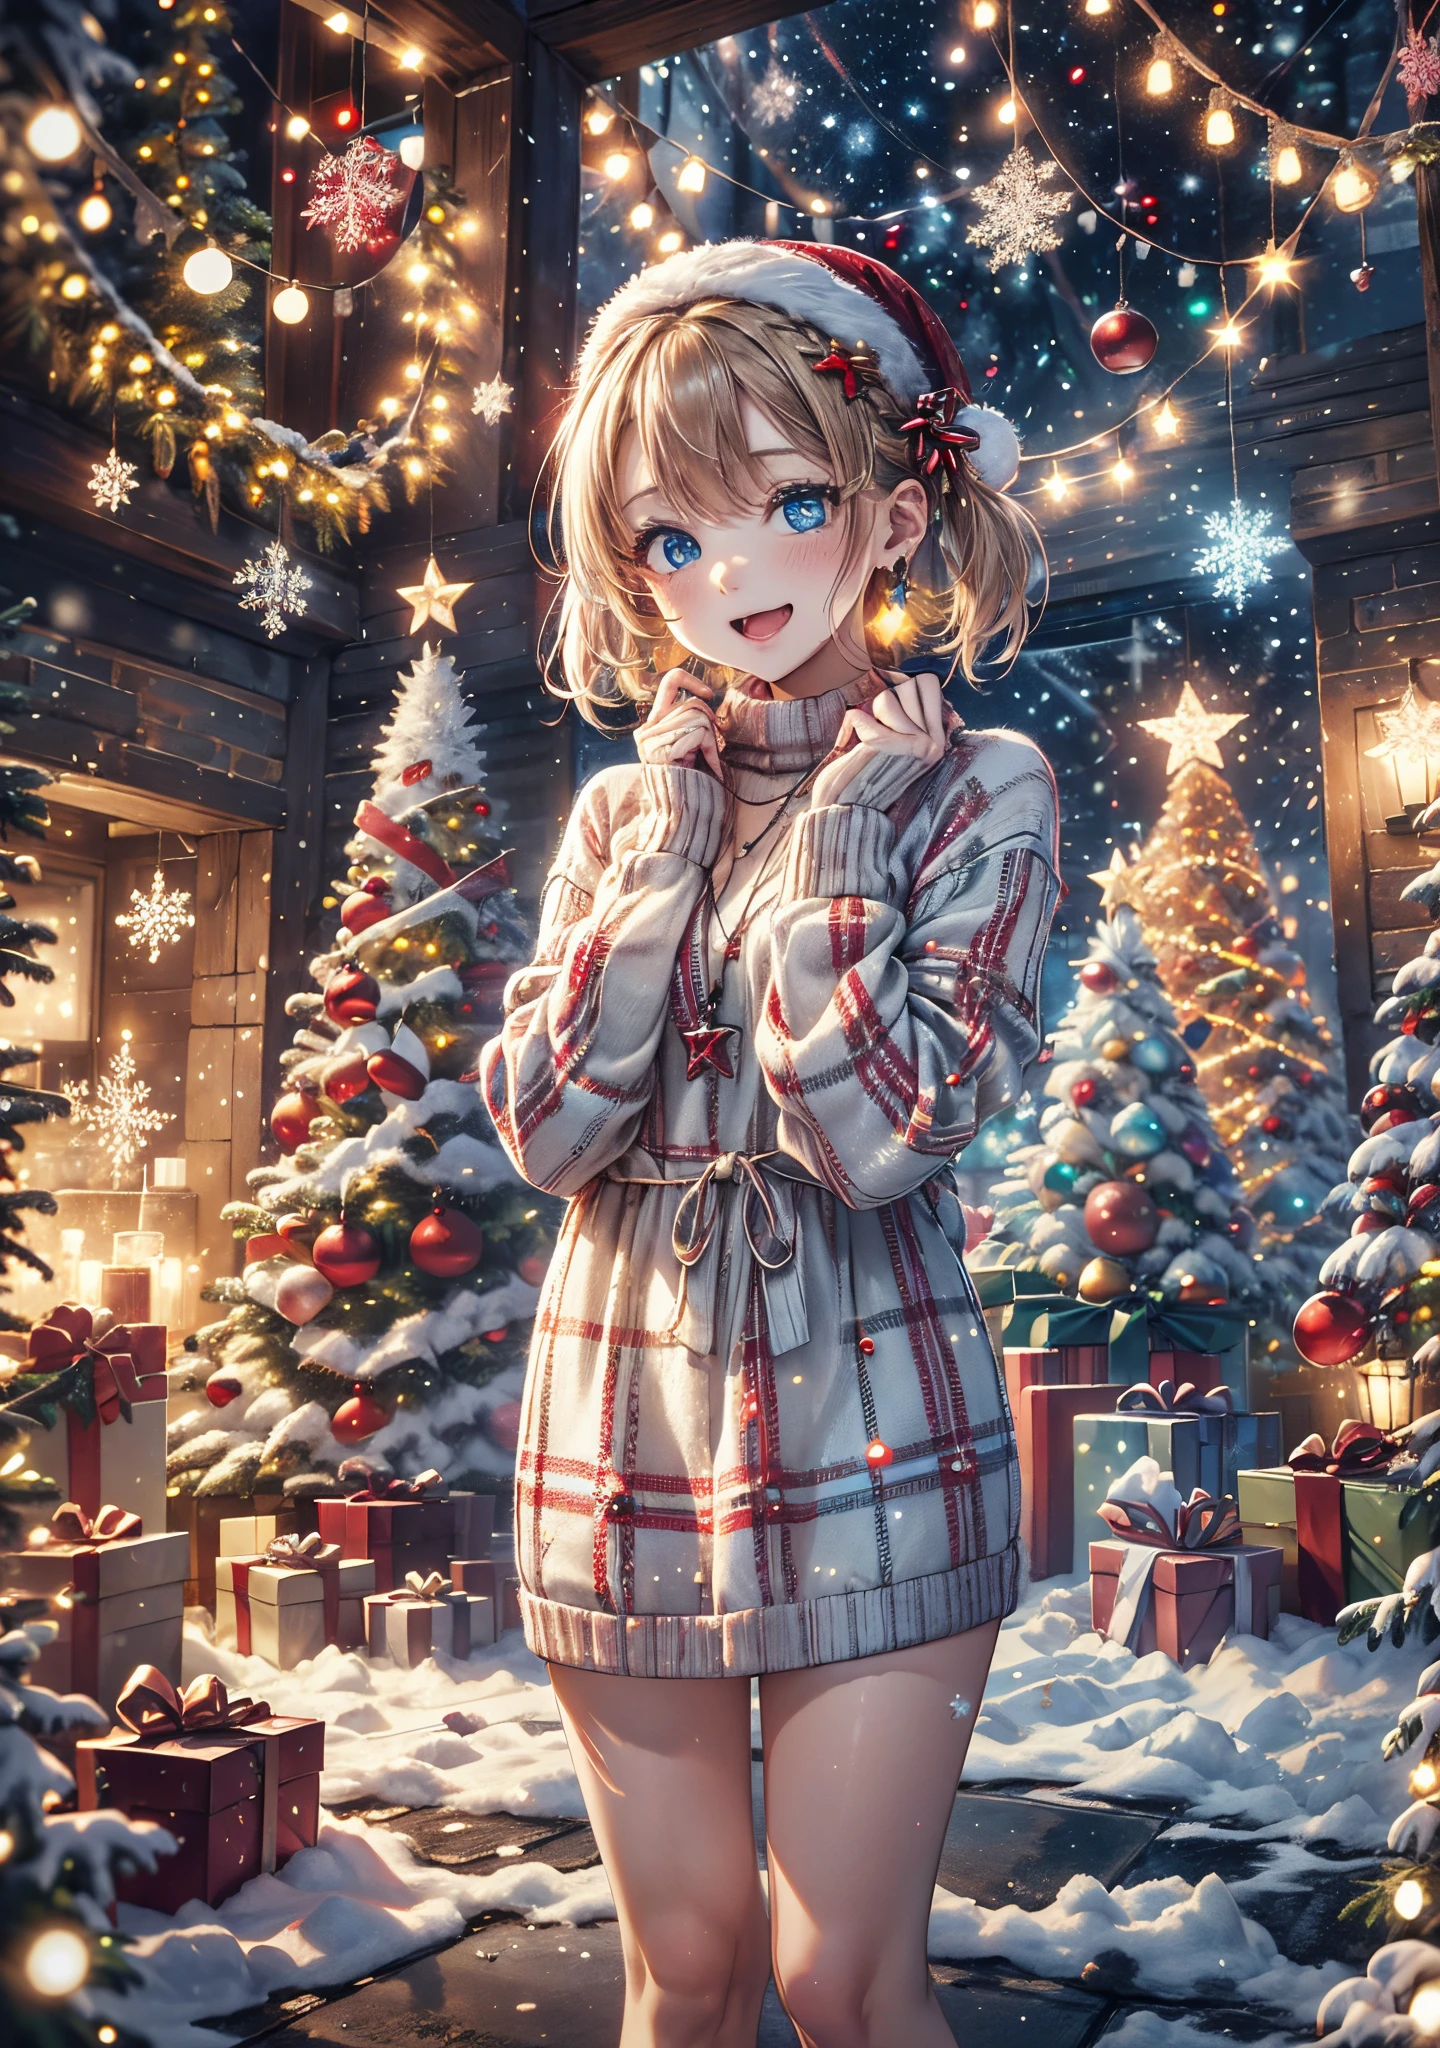 absurderes, ultra-detailliert,bright colour, Short hair,Blonde hair with fluffy short twintails:1.2) Shiny hair,(red and white plaid sweater dress:1.5),(Open mouth and laugh 1. 3),(Close one eye and feel shy:1.3),(Christmas tree:1.3),(Christmas Decorations:1.3),(colorful led lights on the wall:1.5),Delicate beautiful face, red blush、(Deep Blue Eyes:1.5), White skin, hair clips, earrings, a necklace,Heavy snow outside the window,You can also see the starry sky and the aurora borealis........